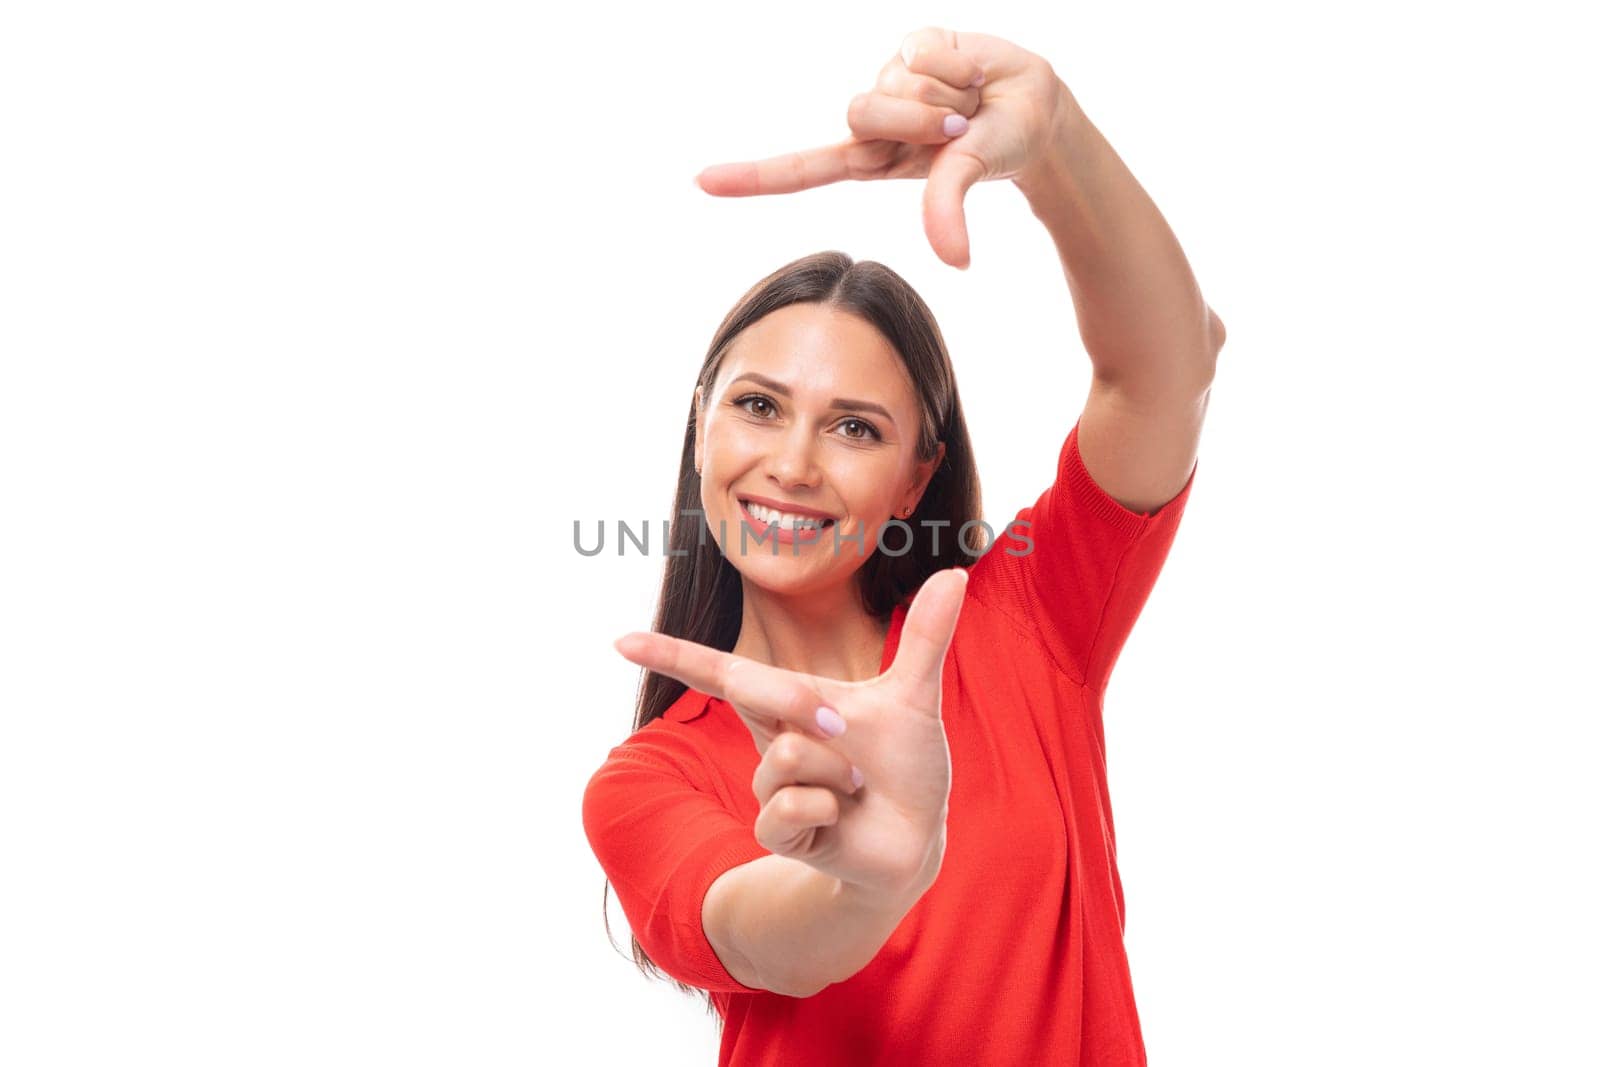 30 year old active Caucasian woman with straight dark hair dressed in red short sleeve shirt smiling on white background by TRMK